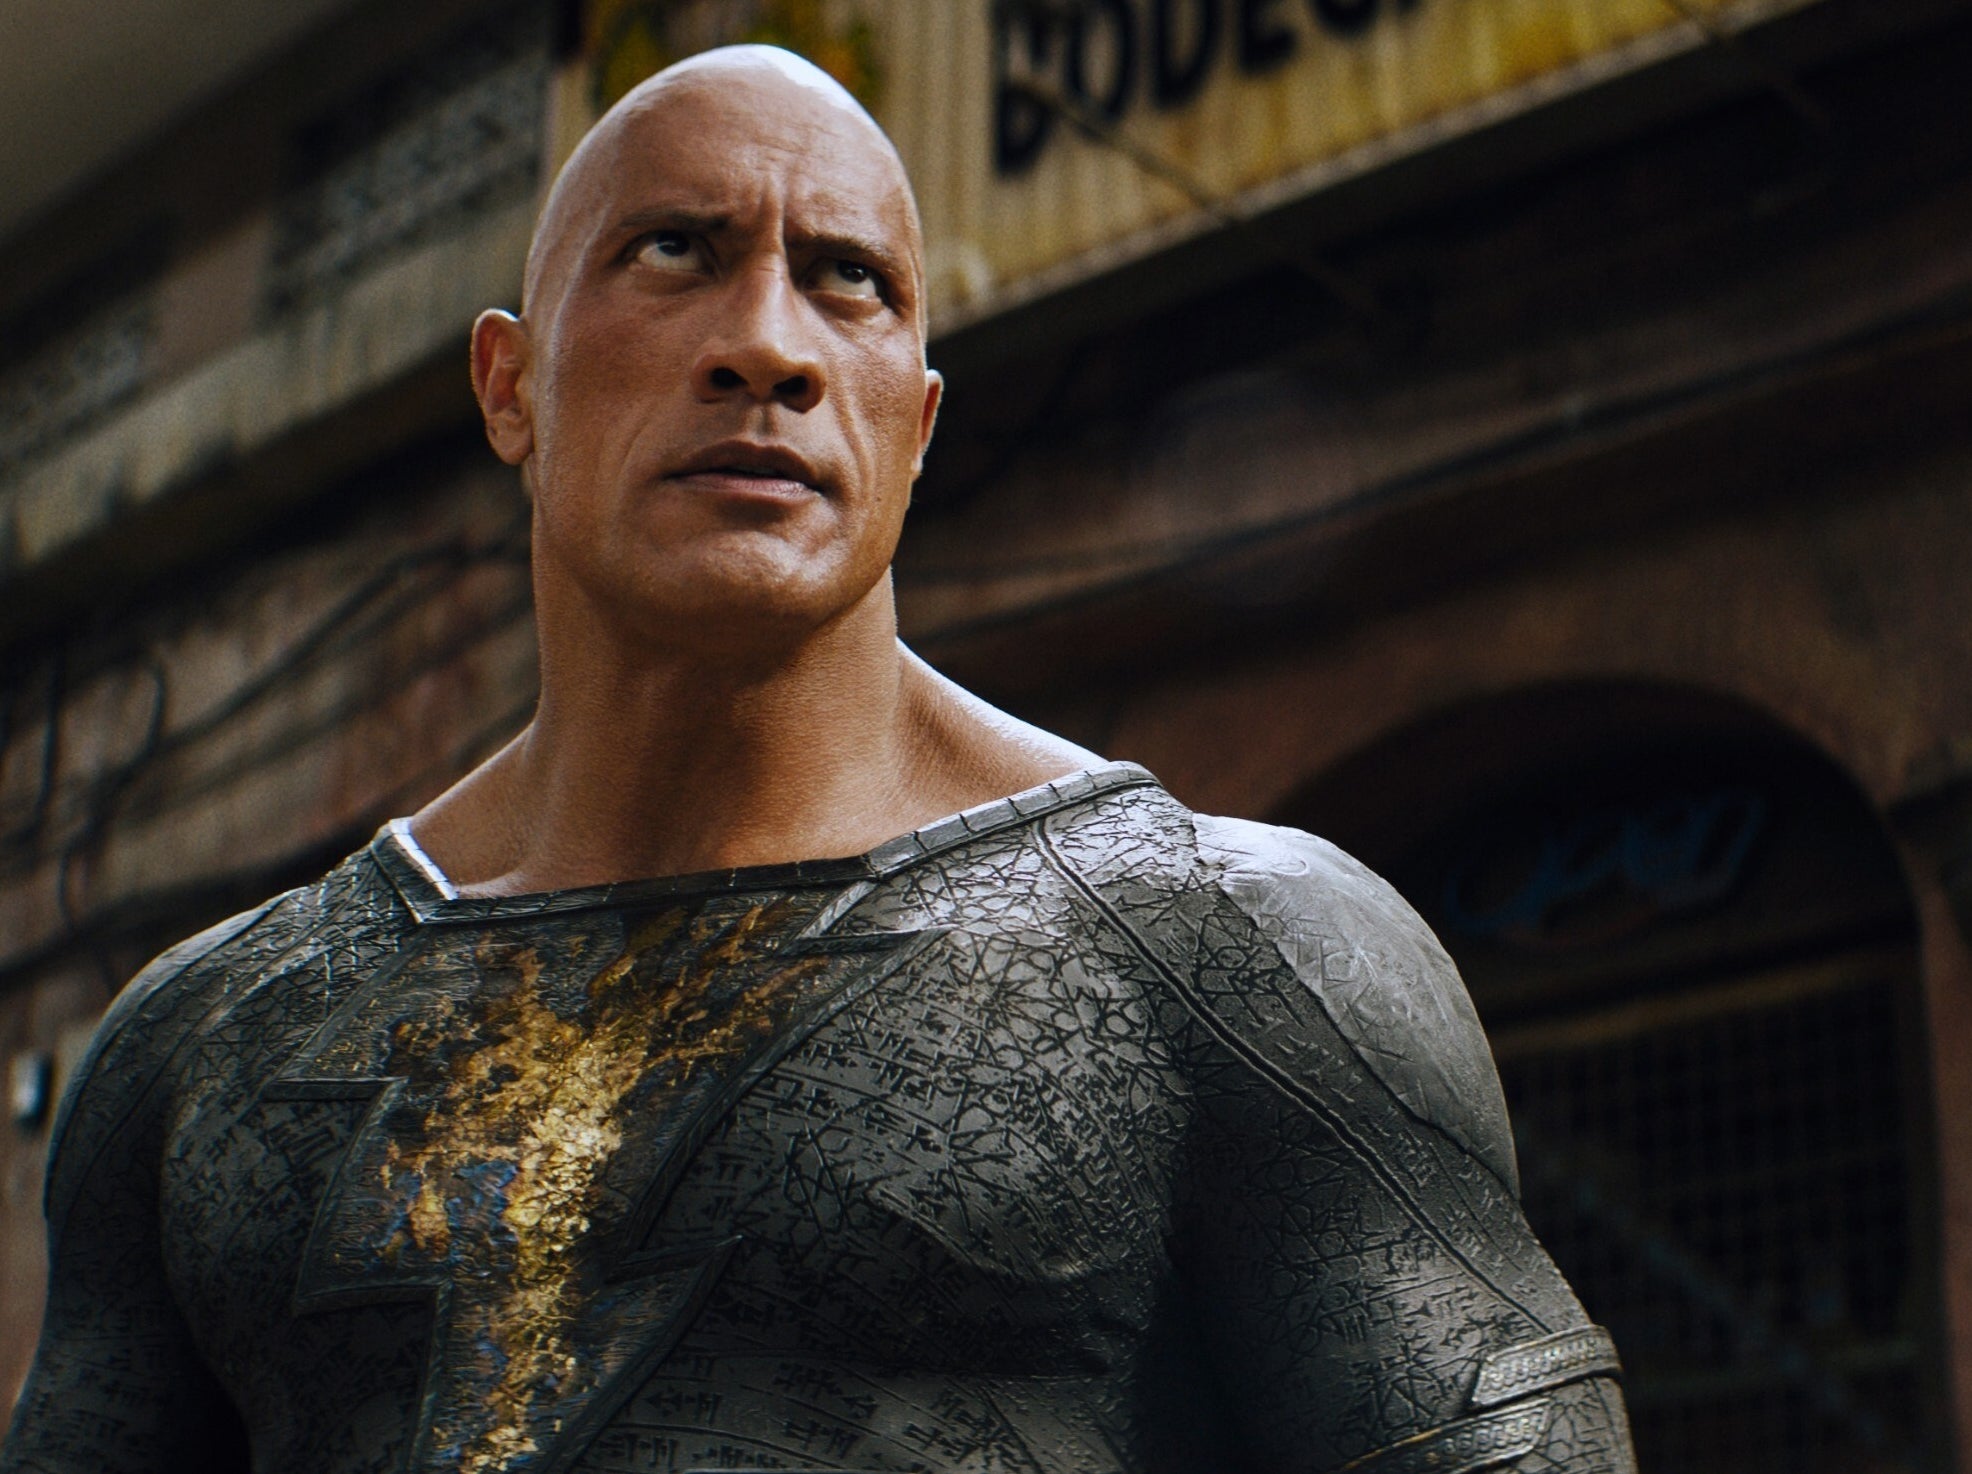 REVIEW - 'Black Adam' is a Visual Feast for Action Fans